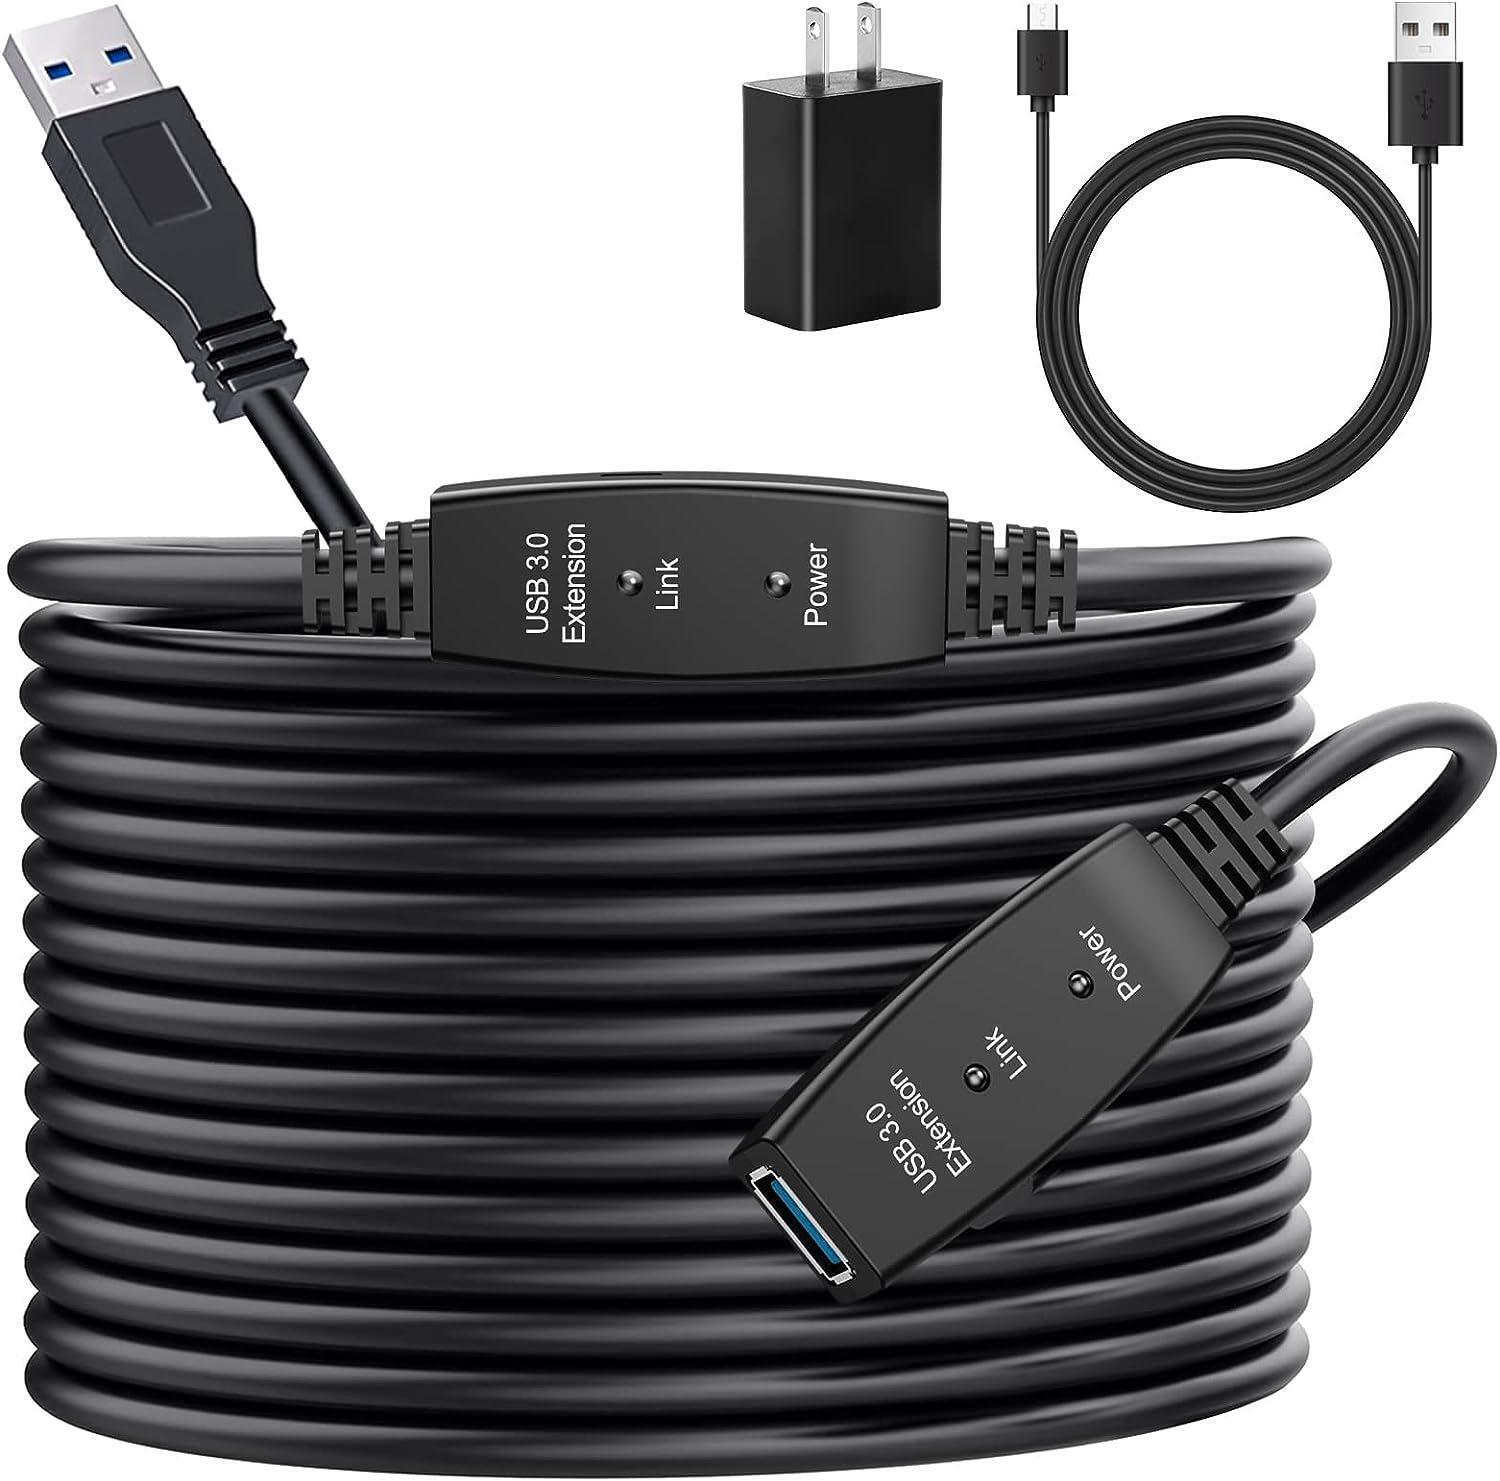 USB 3.0 Extension Cable 50Ft, HOUHUI 50 Feet Active USB Extension Cable 3.0 Male